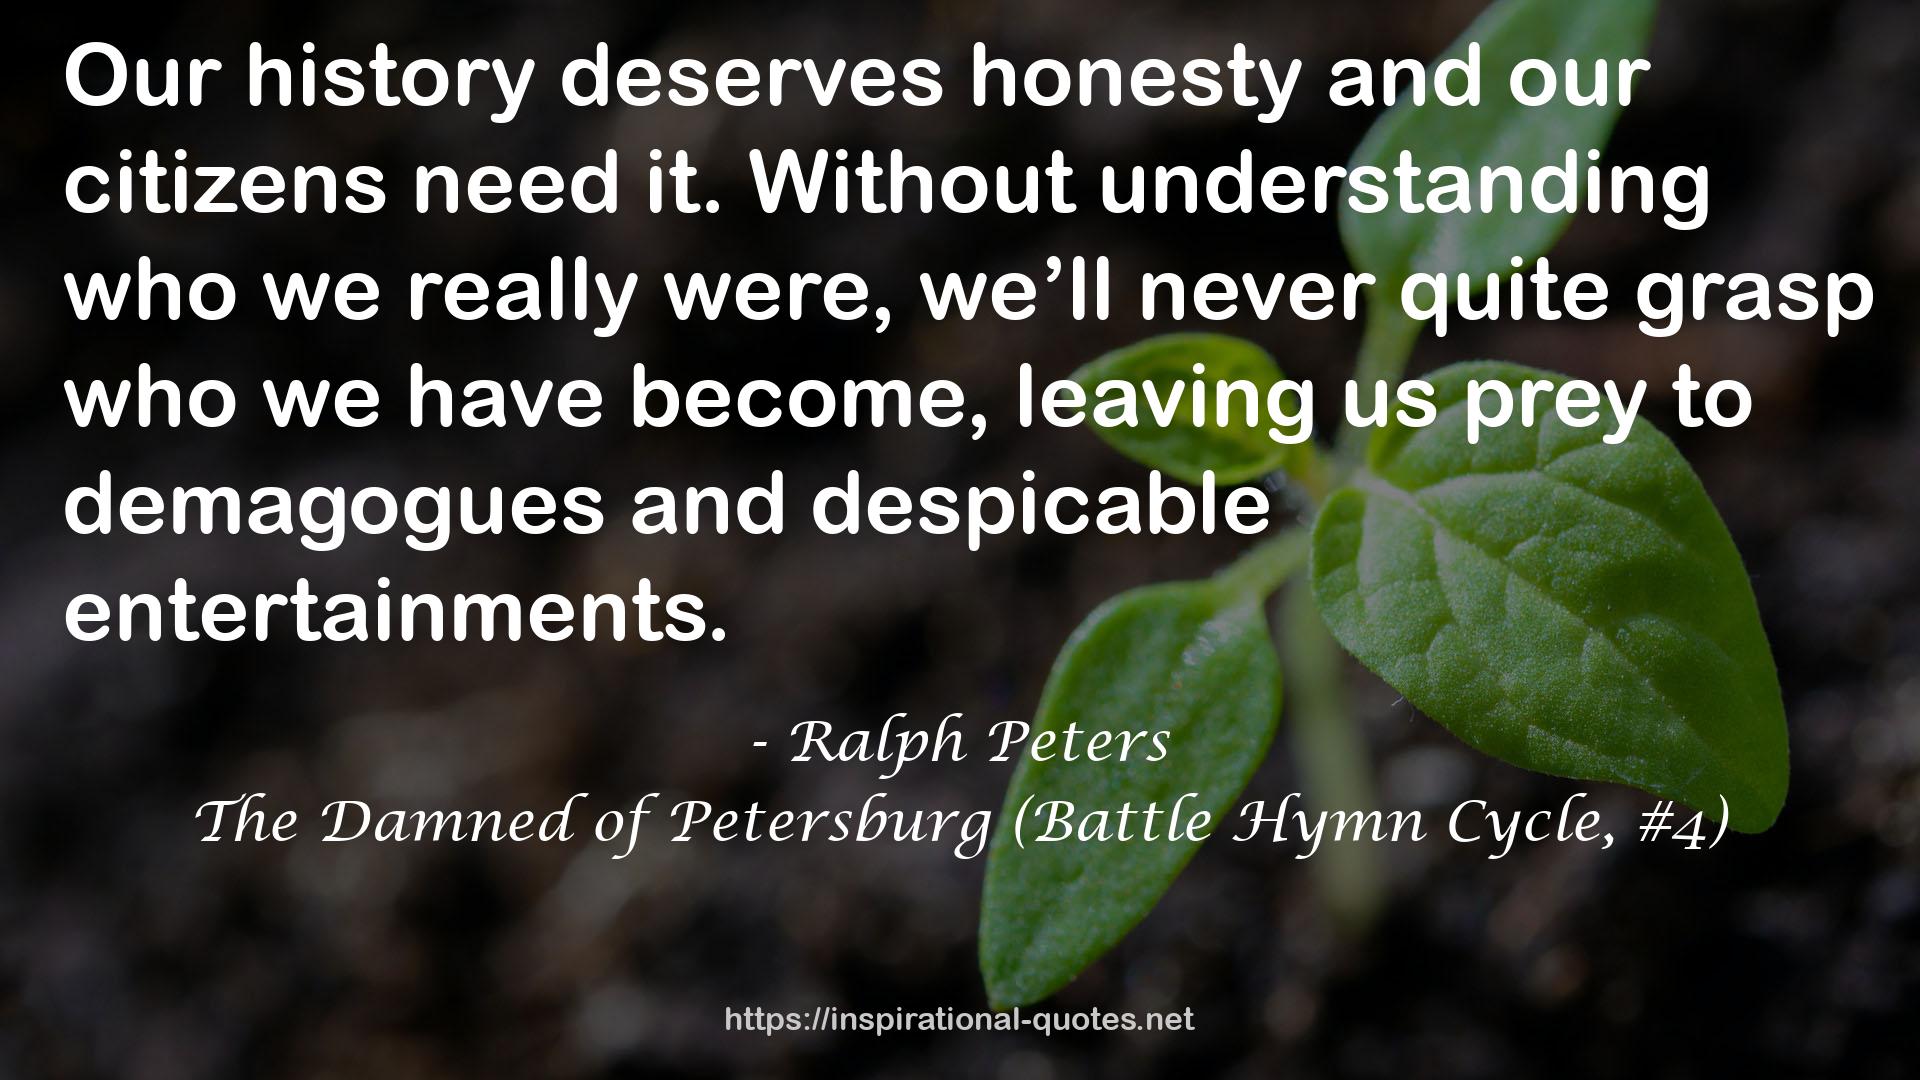 The Damned of Petersburg (Battle Hymn Cycle, #4) QUOTES